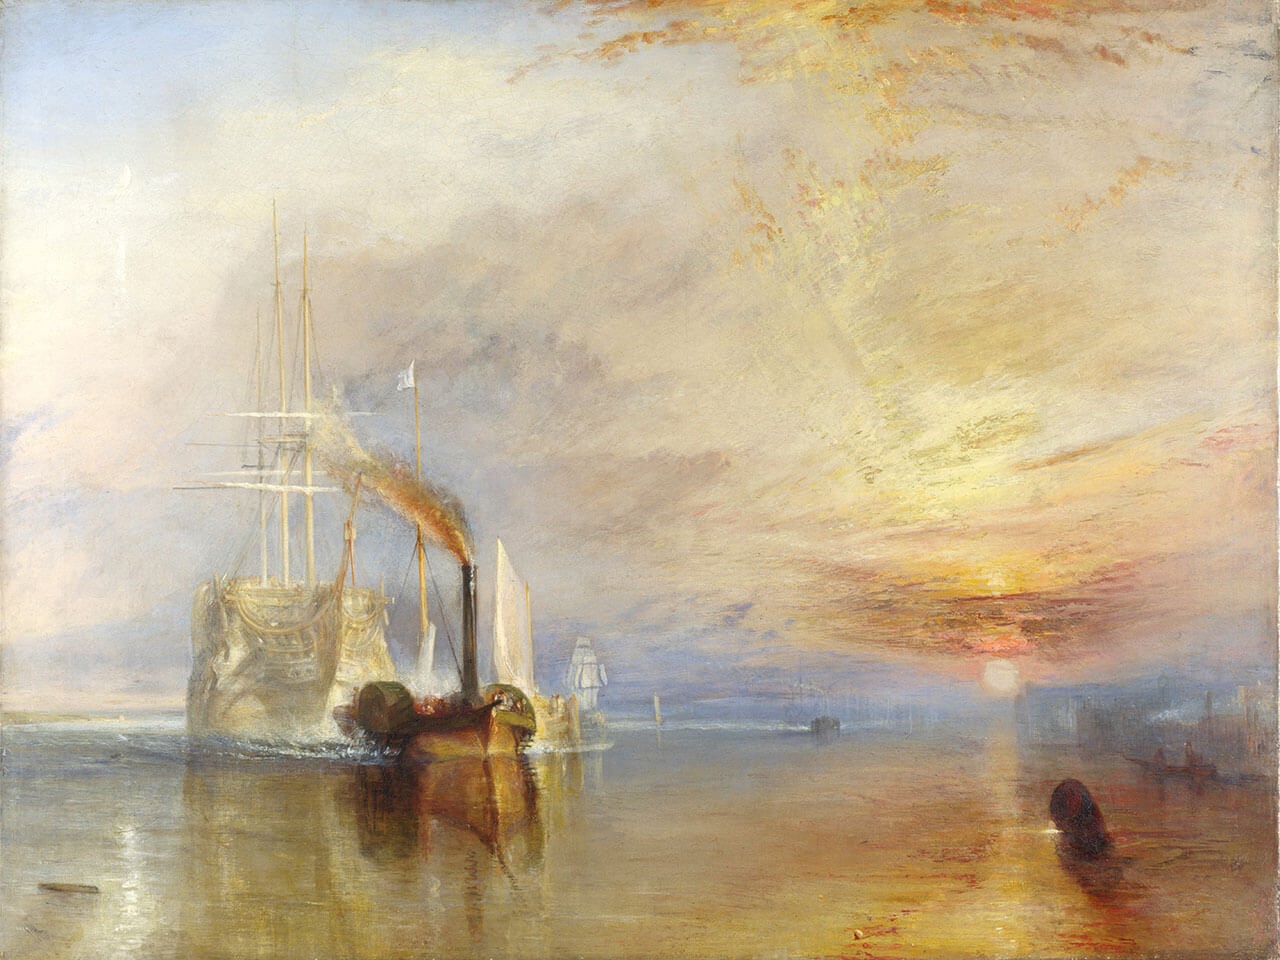 English romantic artist J. M. W. Turner's oil painting, The Fighting Temeraire, tugged to her last berth to be broken up 1838